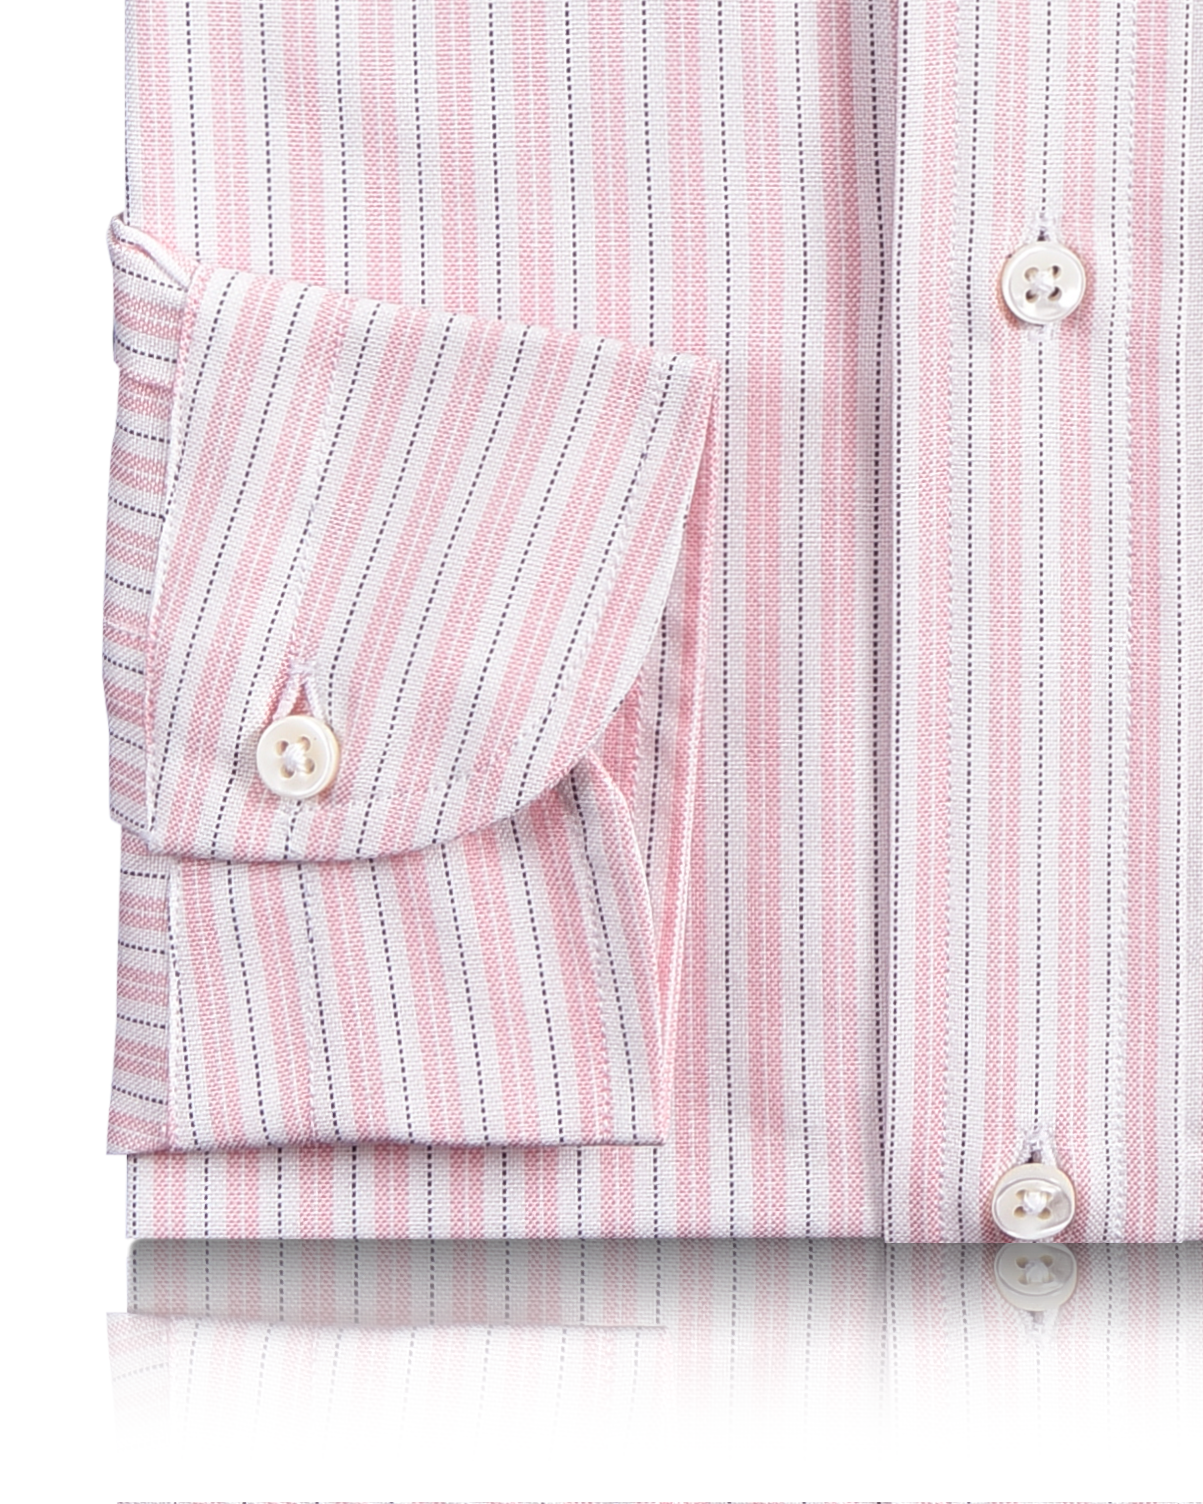 Alumo Oxford Soft Pink and Navy Alternate Stripes